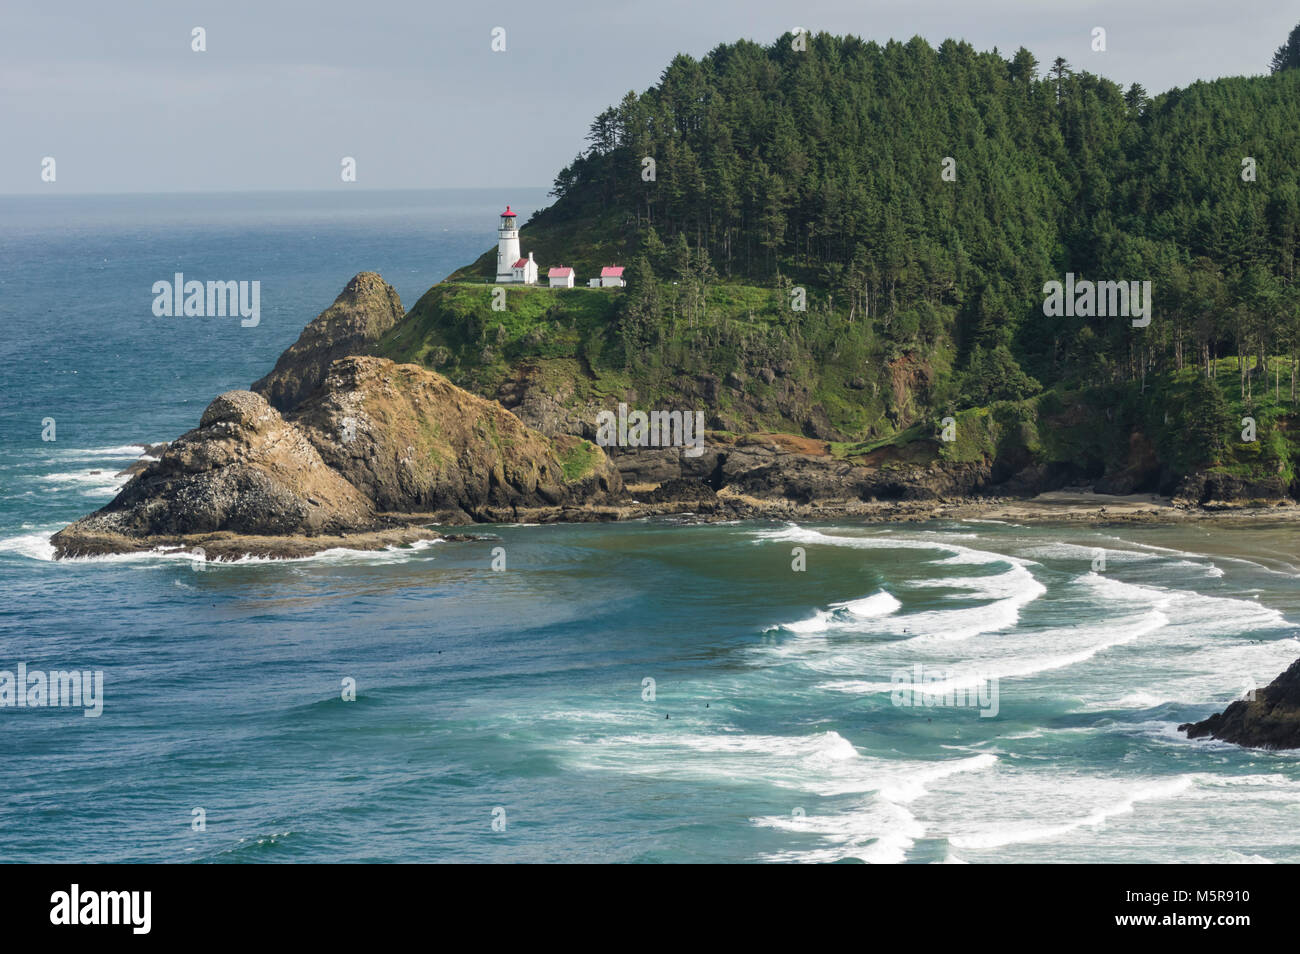 Heceta Head Lighthouse was constructed in 1892 - 1893 and opened in August of 1893.  The lighthouse itself is 56 feet tall and the light is the strongest on the Oregon coast. Stock Photo